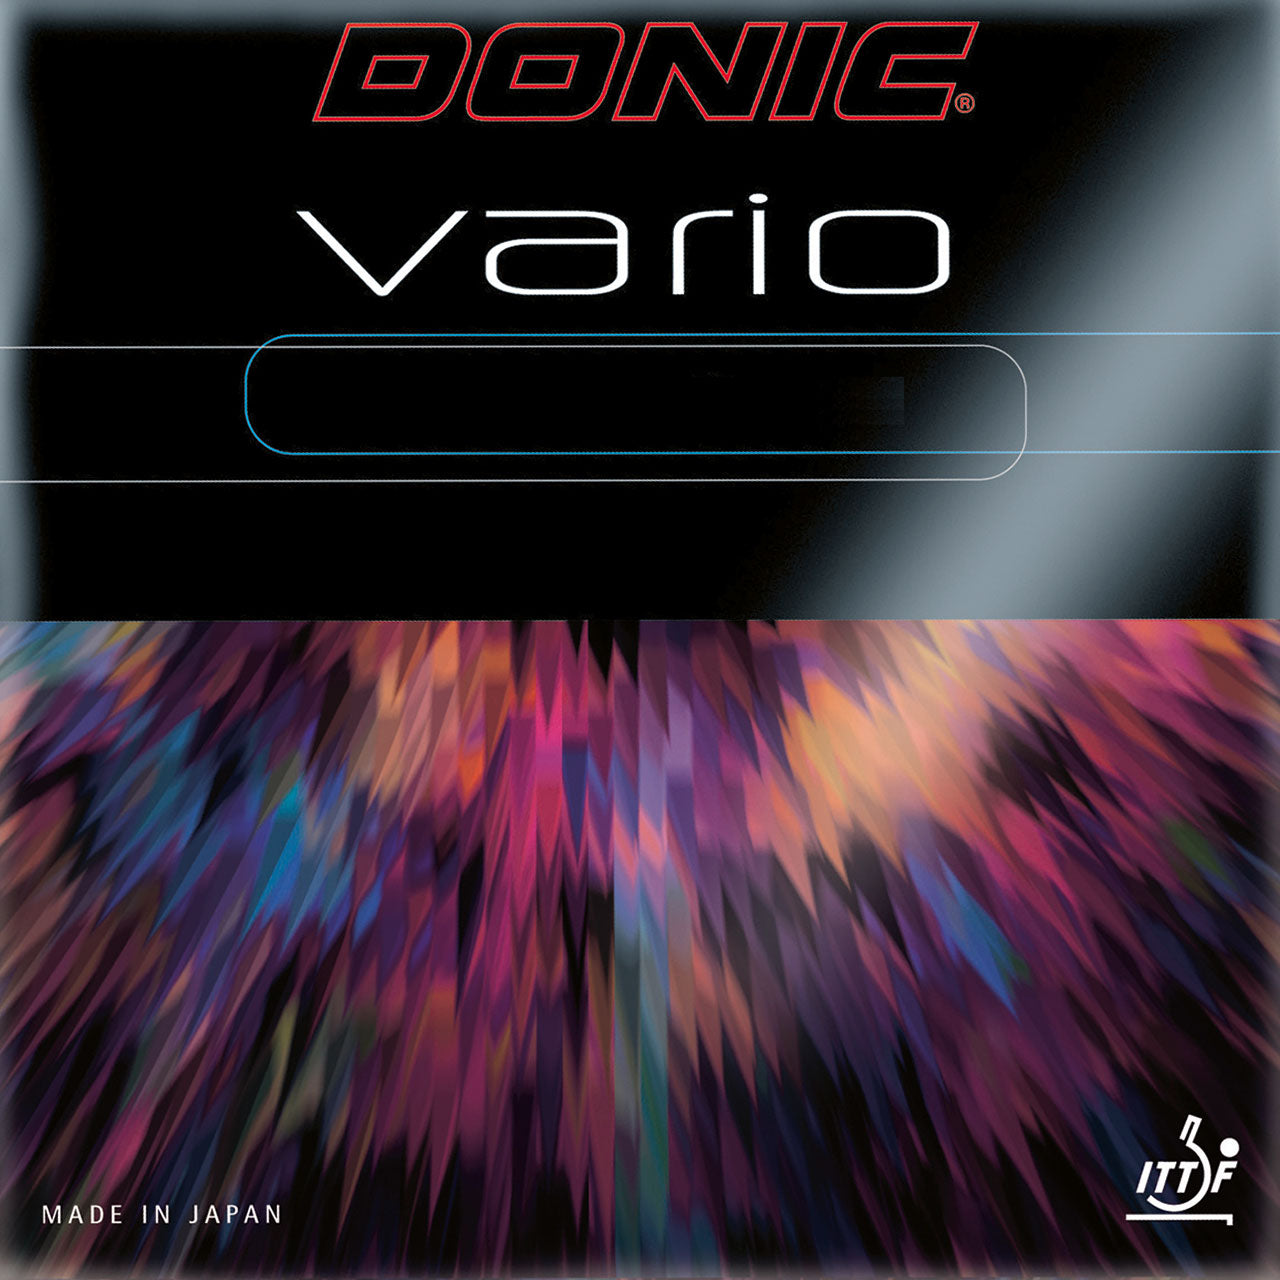 Donic Vario - Killypong